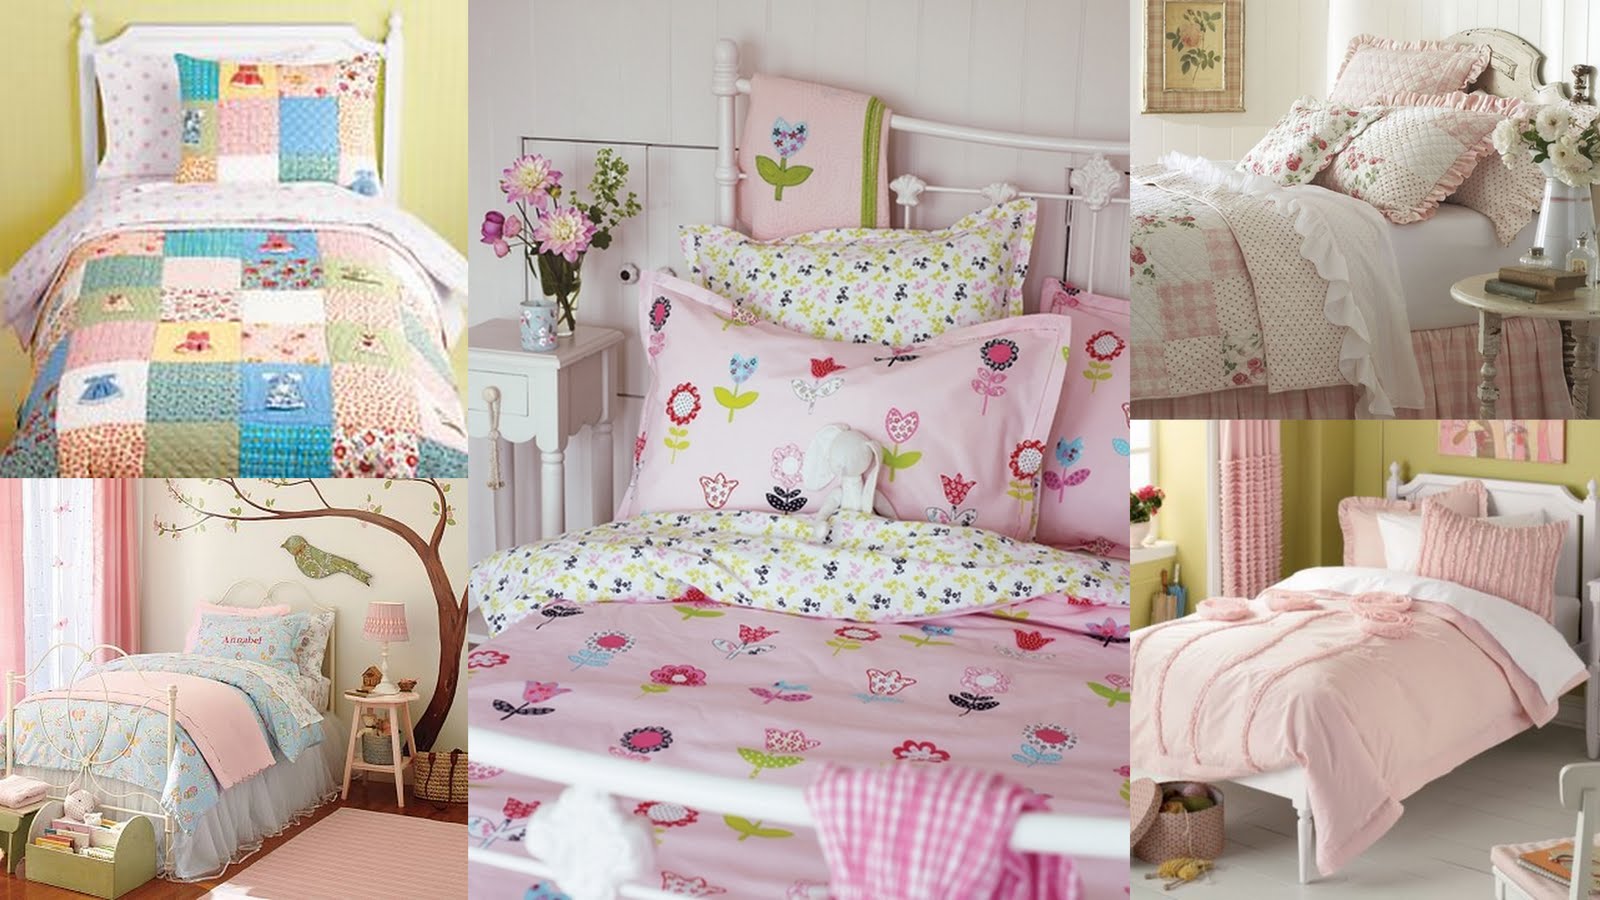 House on Ashwell lane: Bedding to suit your little girl's personality